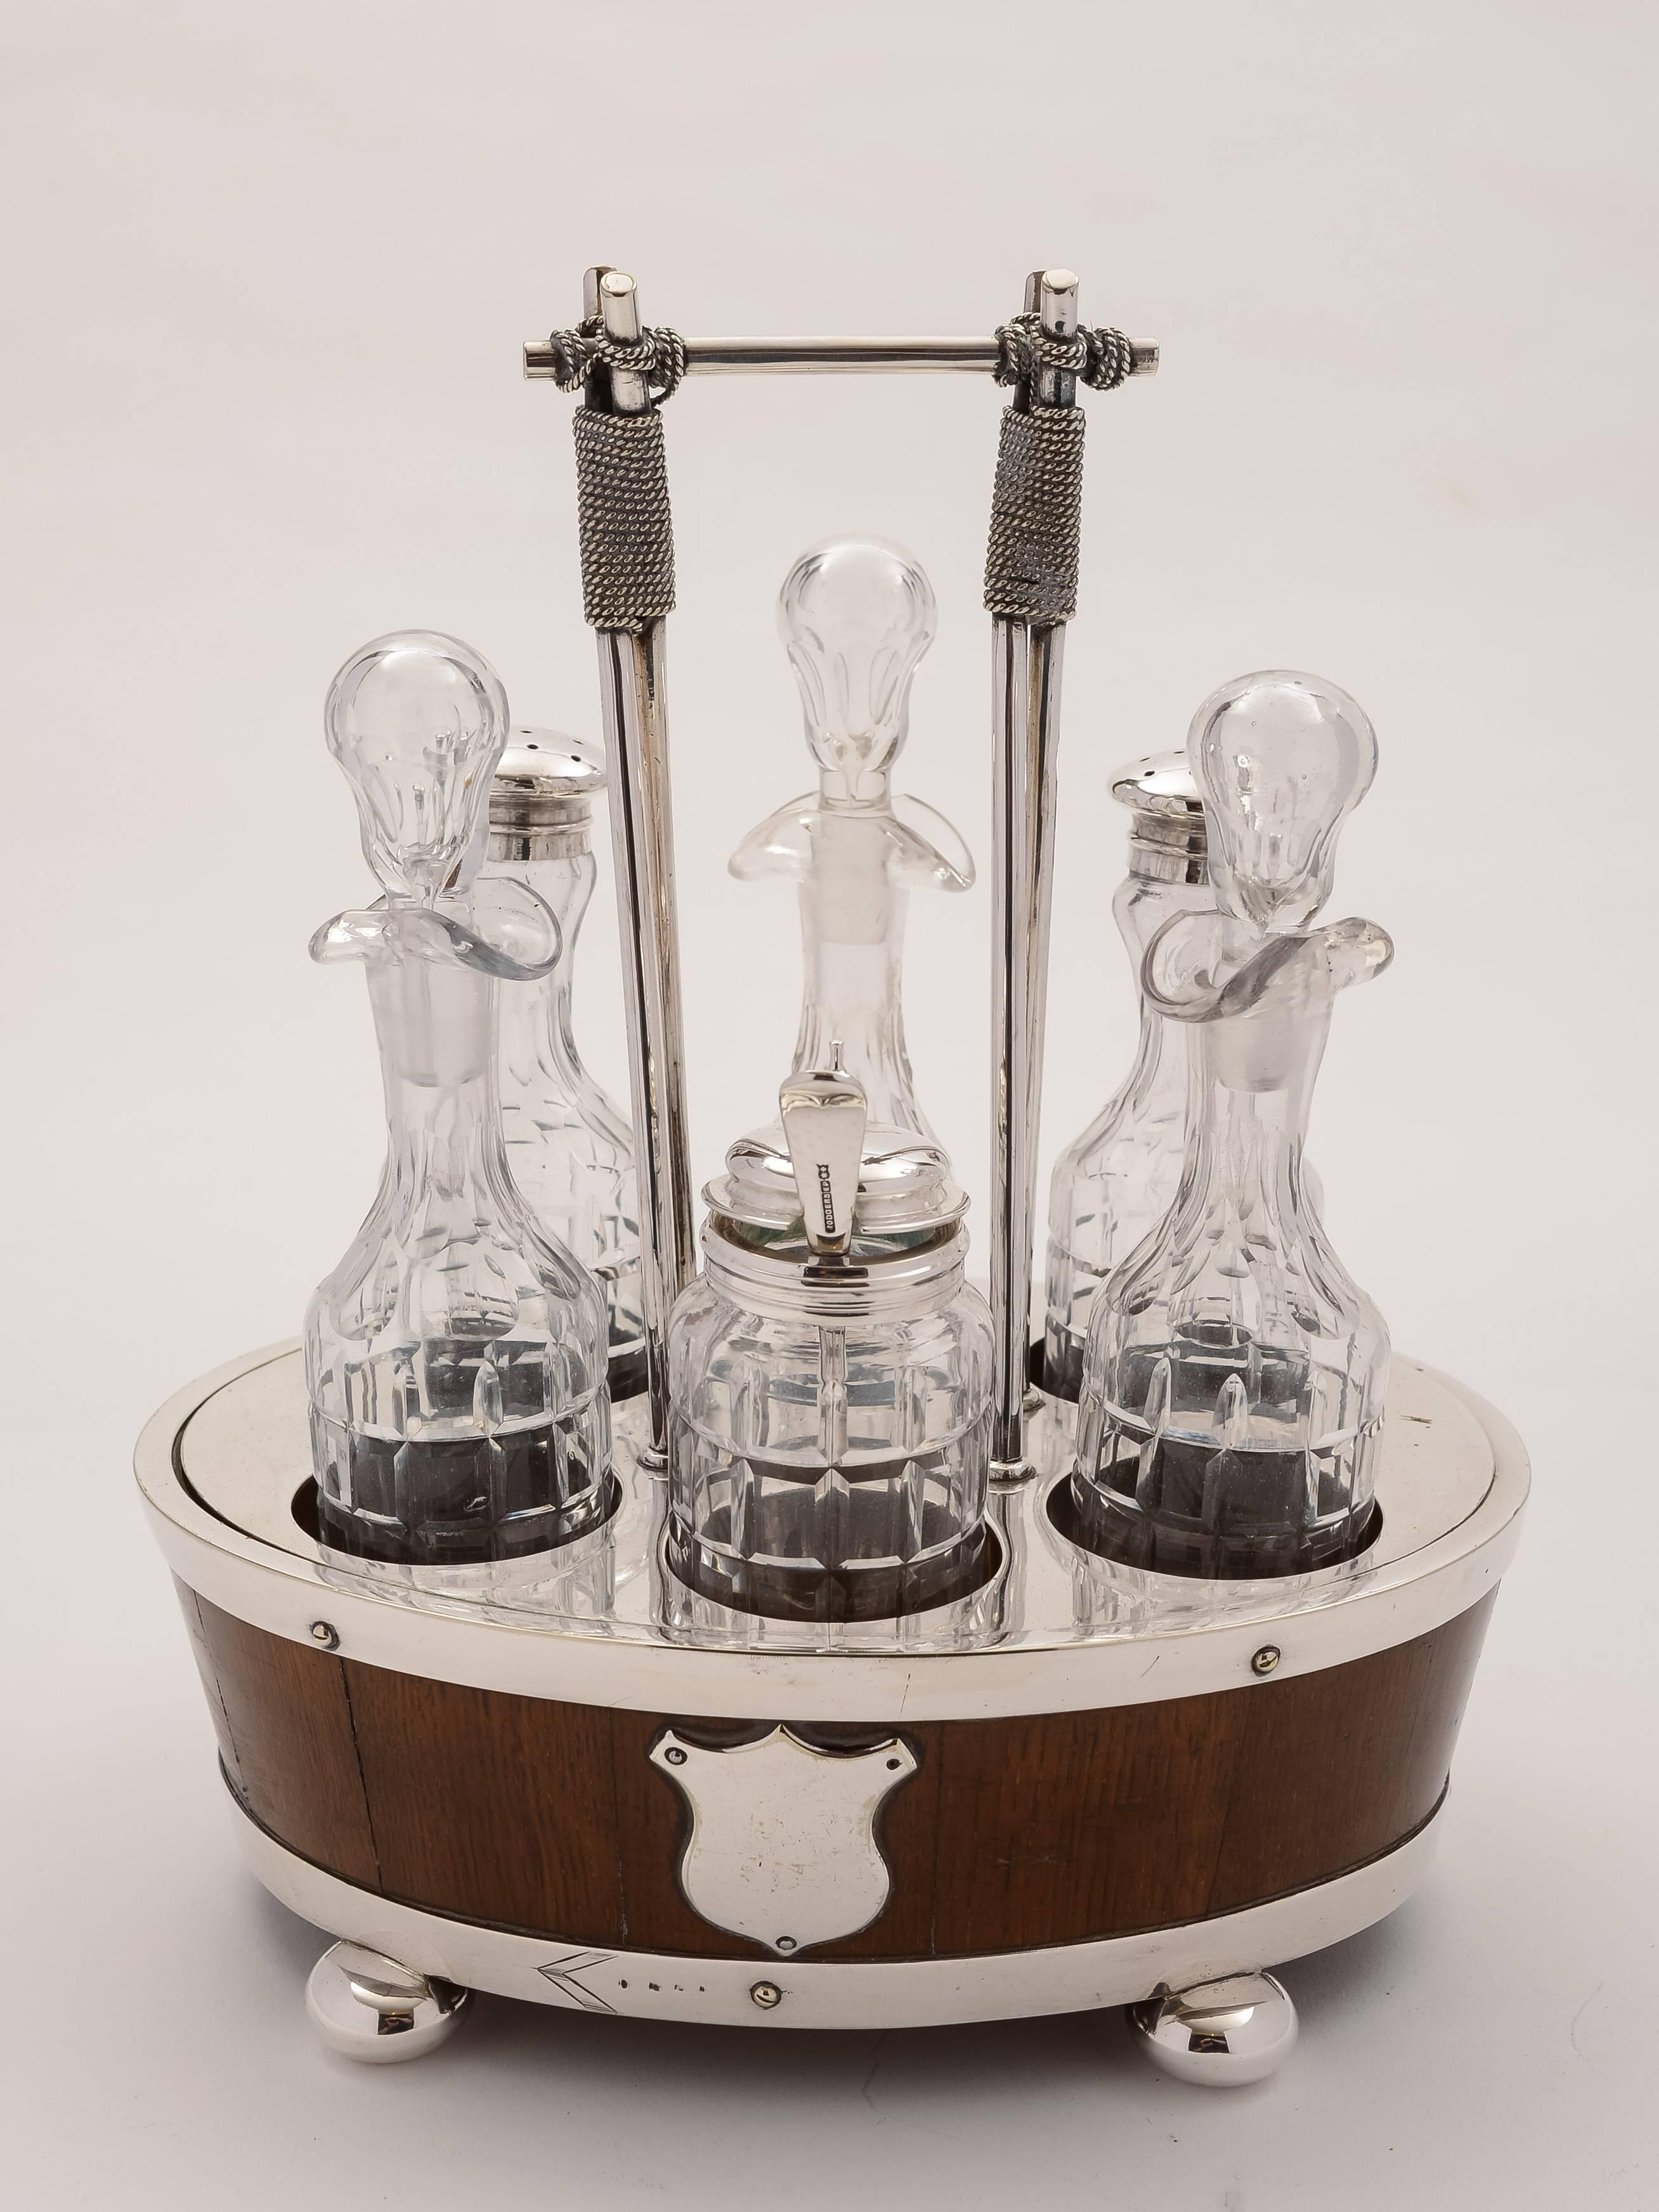 A fabulous English oak and silver plated cruet which consists of six cut-glass bottles, three for oil and vinegar, two bottles with sifter tops and one mustard pot. They stand in an oak and silver plated frame which has vacant cartouche shields to